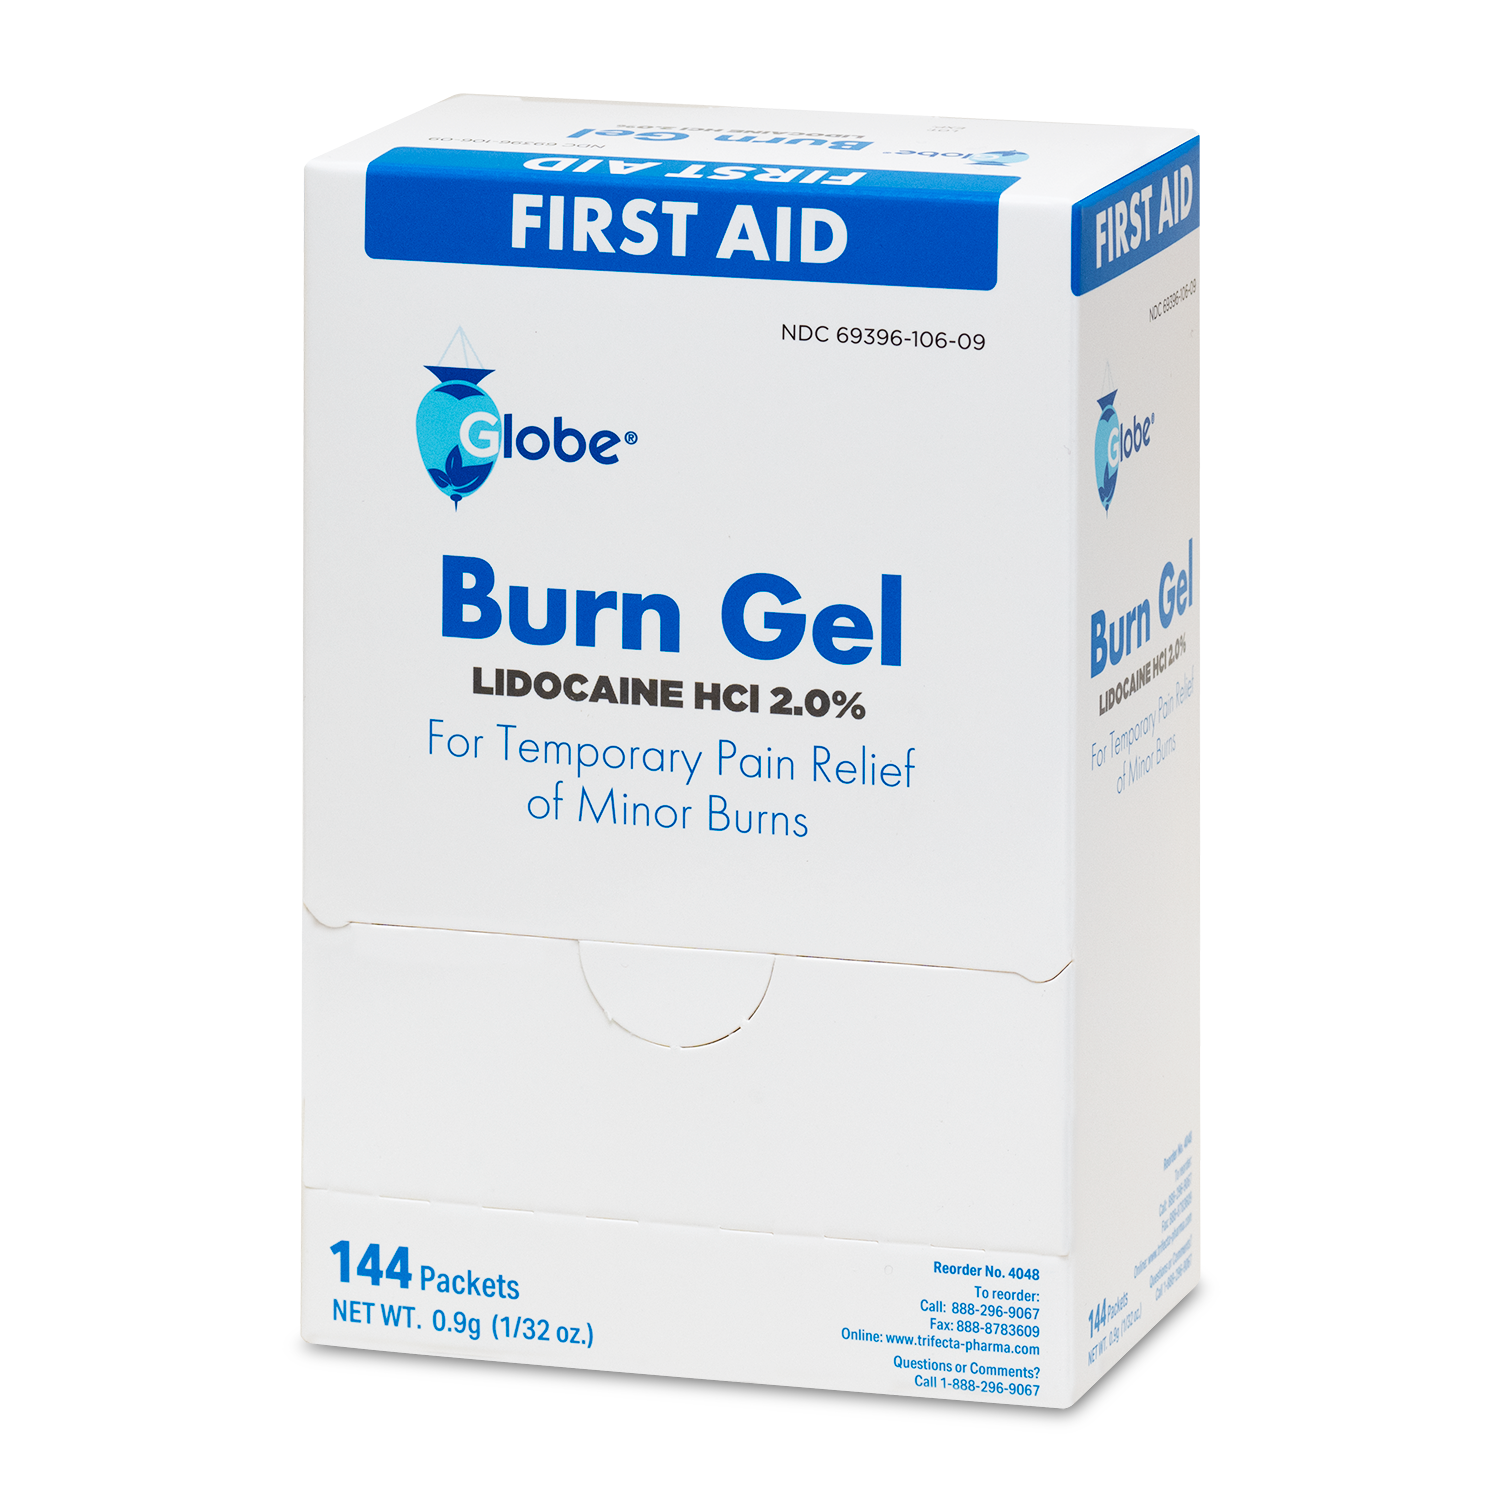 Globe First Aid Burn Gel with Aloe 0.9g Packets, (Box of 144) Advanced First Aid Gel for Temporary Relief of Minor Burns, Cuts, and Scrapes